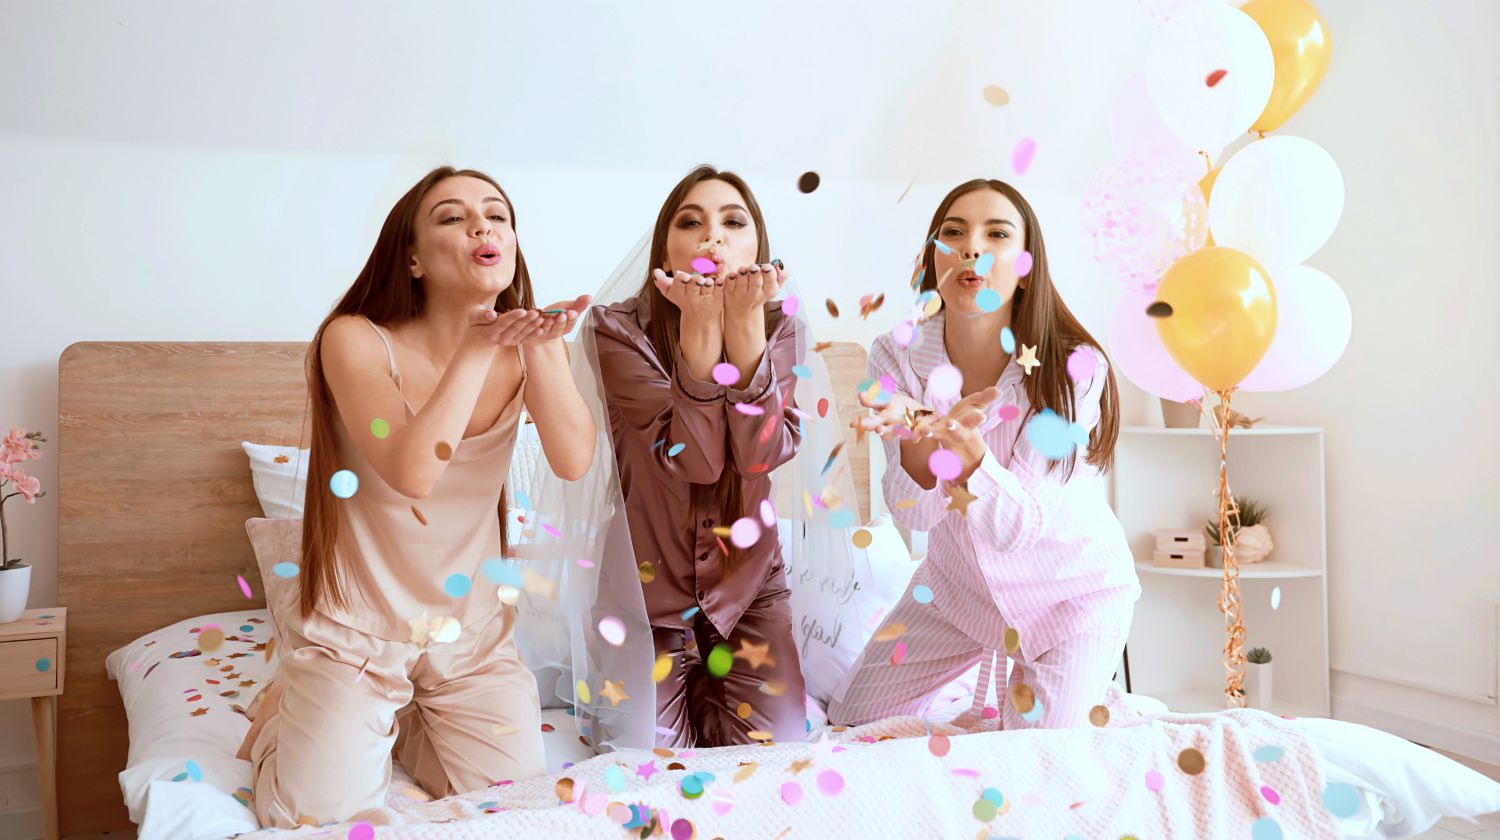 Featured | women having pajama party | How To Plan A Pajama Party That You And Your Friends Will Enjoy | pajama party decorations